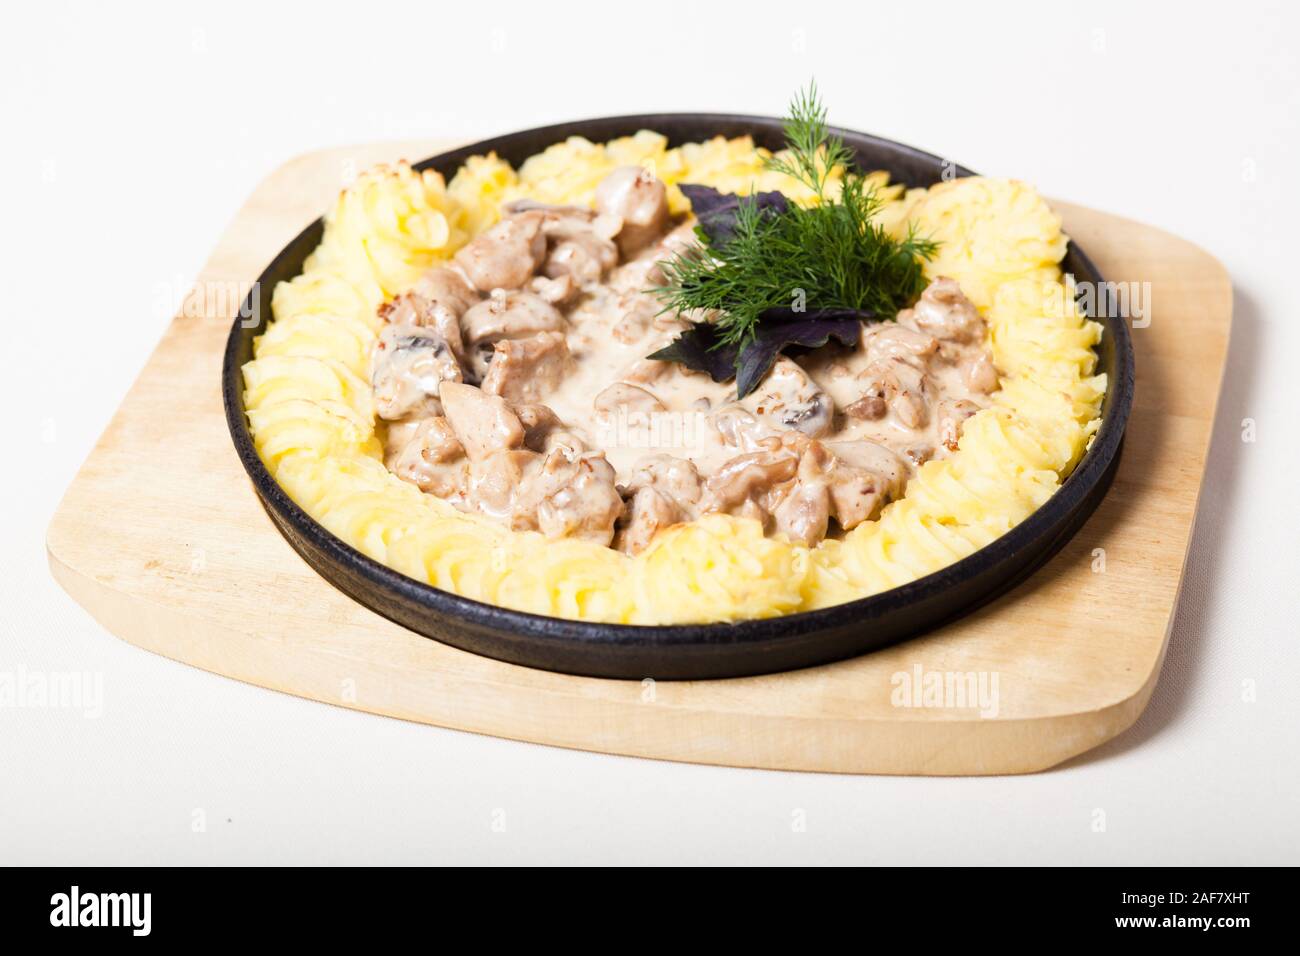 Rabbit stew in cream sauce with mushrooms and mashed potato Stock Photo